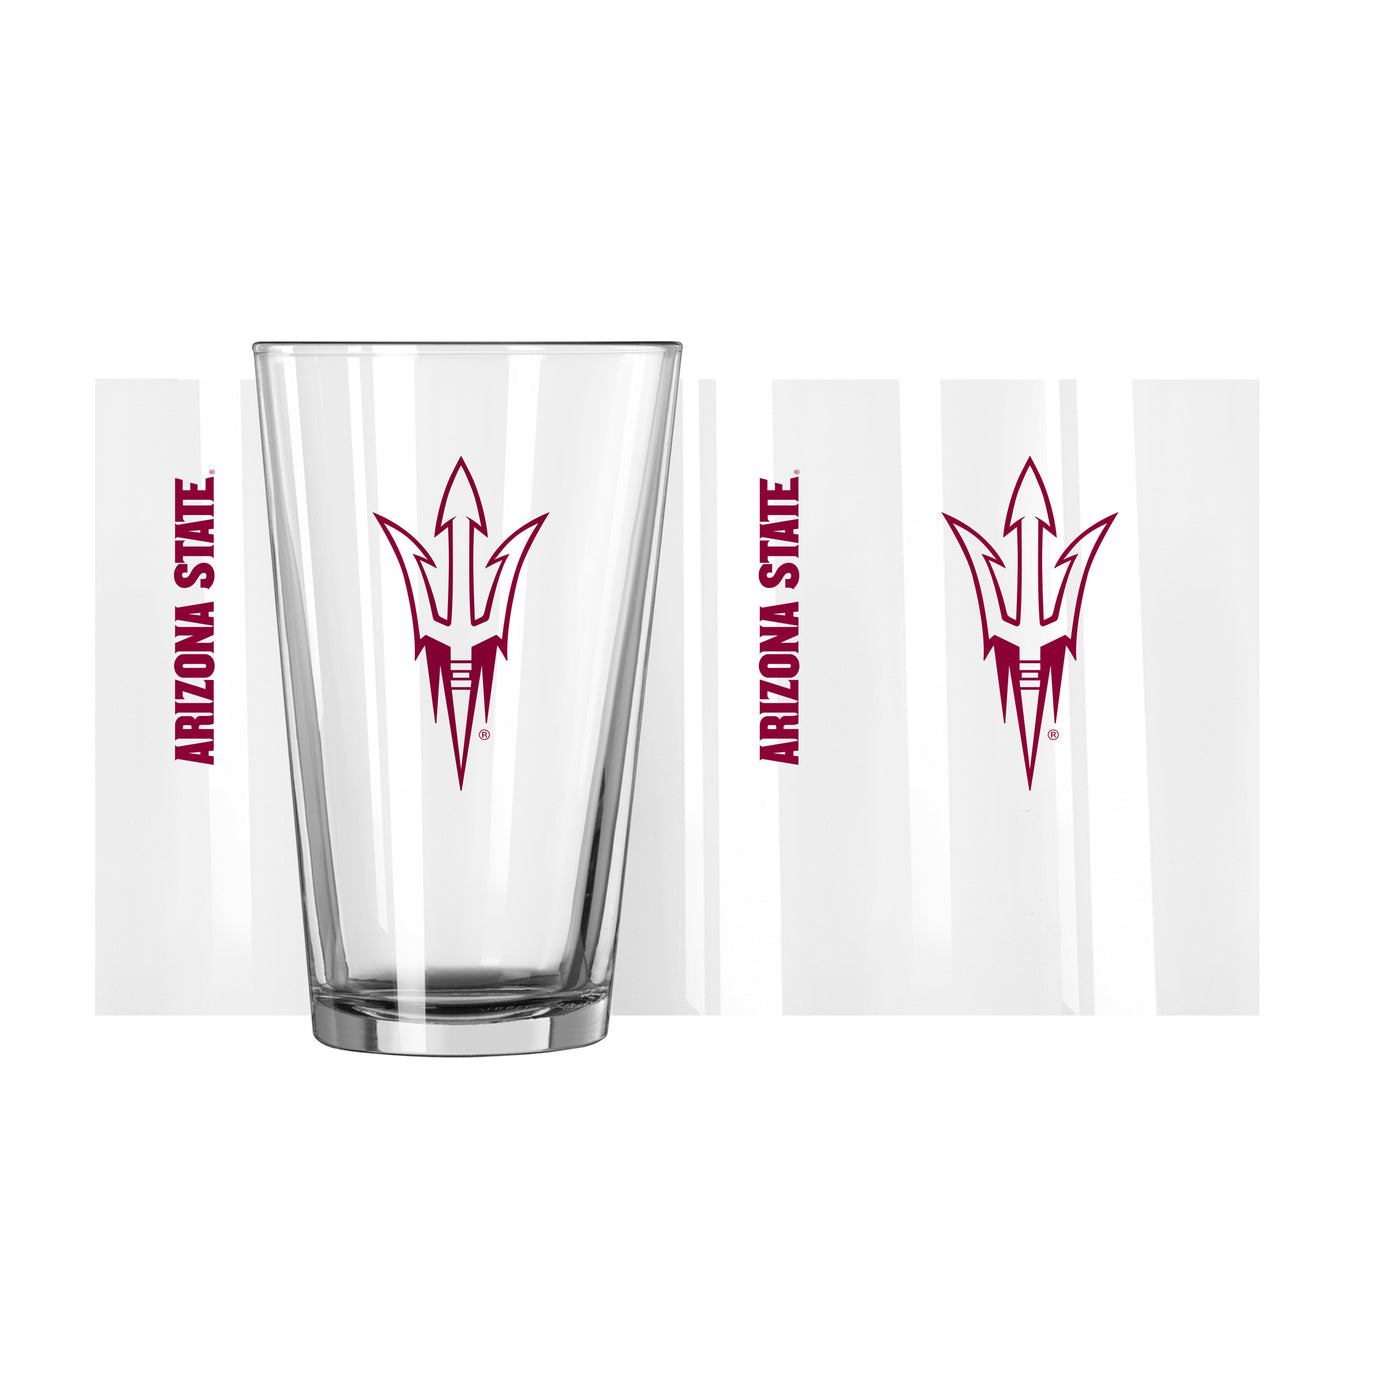 ASU pint glass sides with 'Arizona State' listed vertically